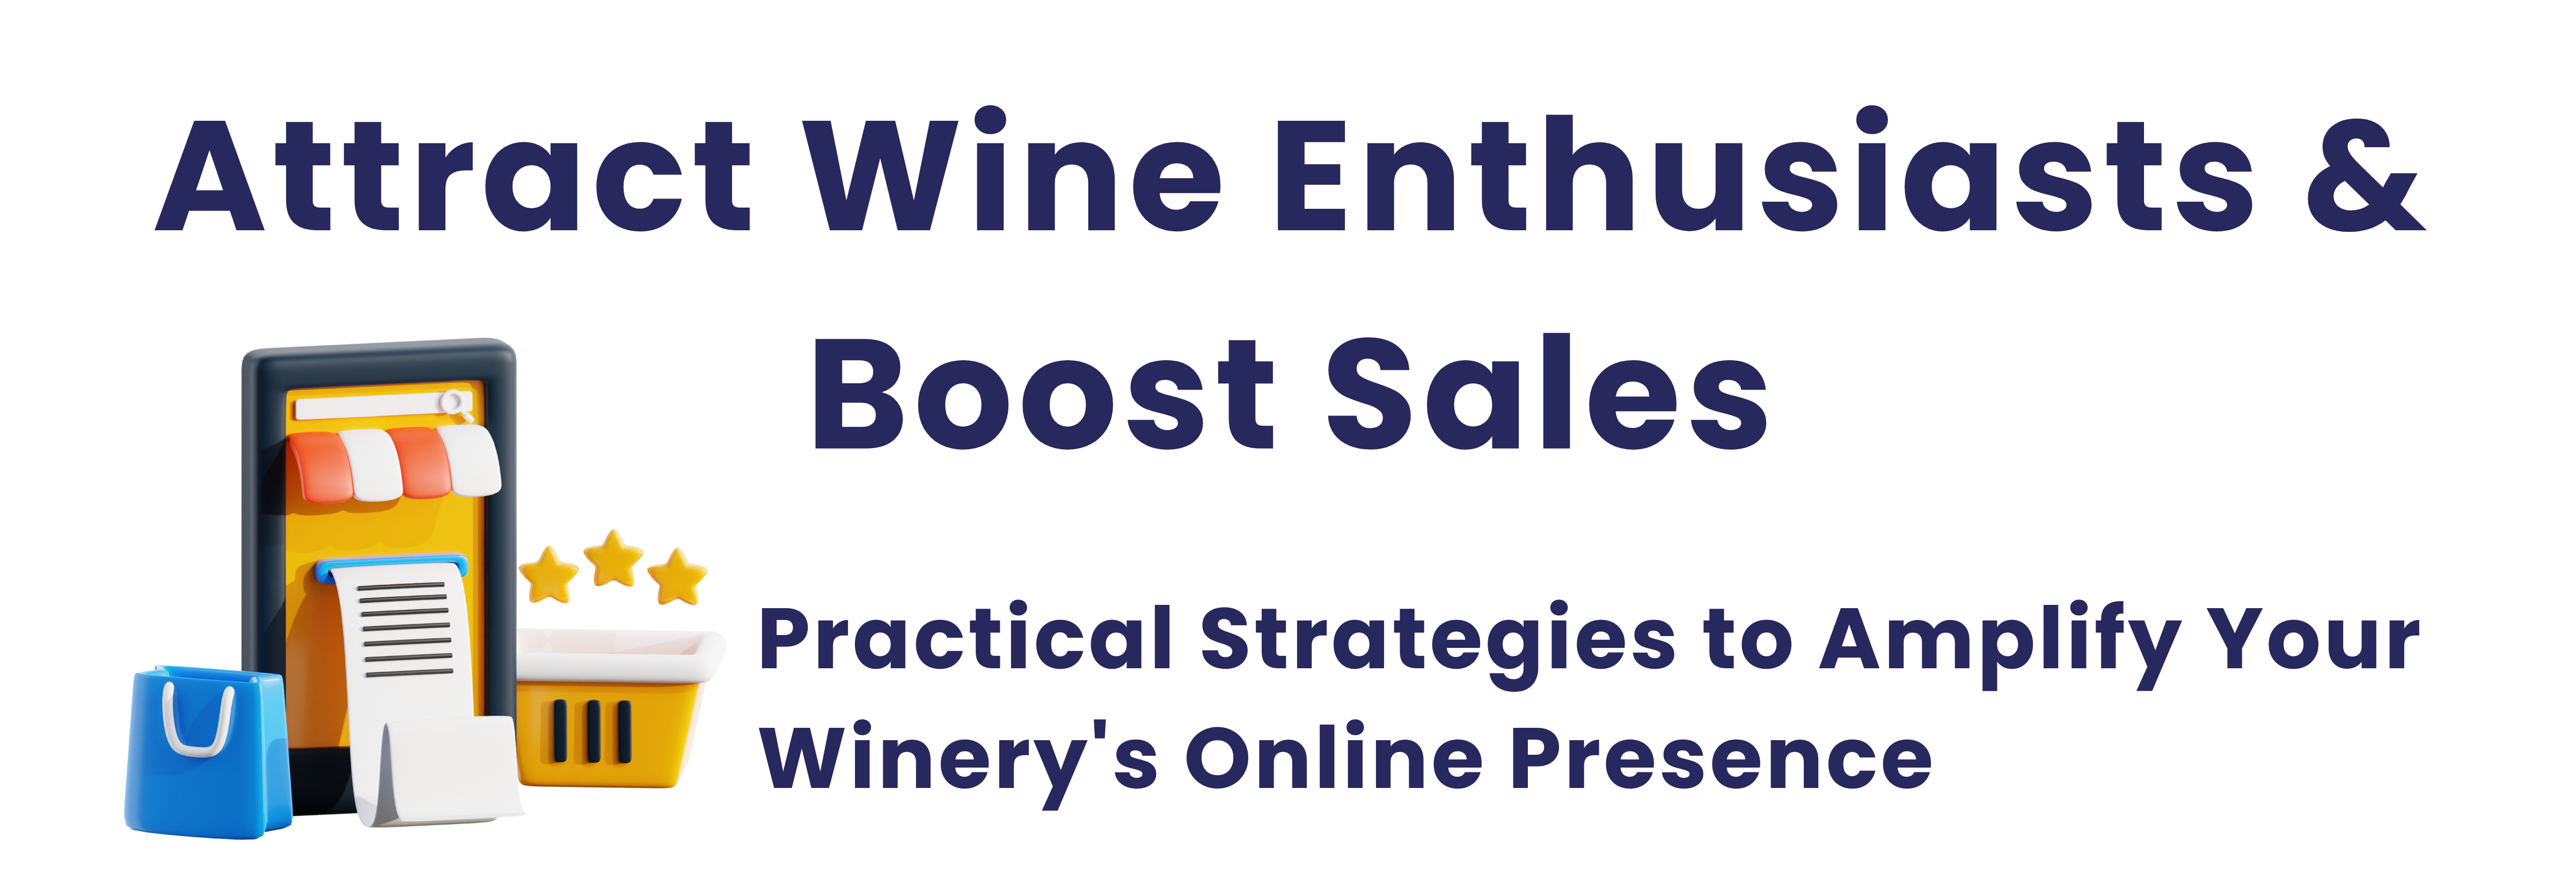 Attract Wine Enthusiasts & Boost Sales Blog Post